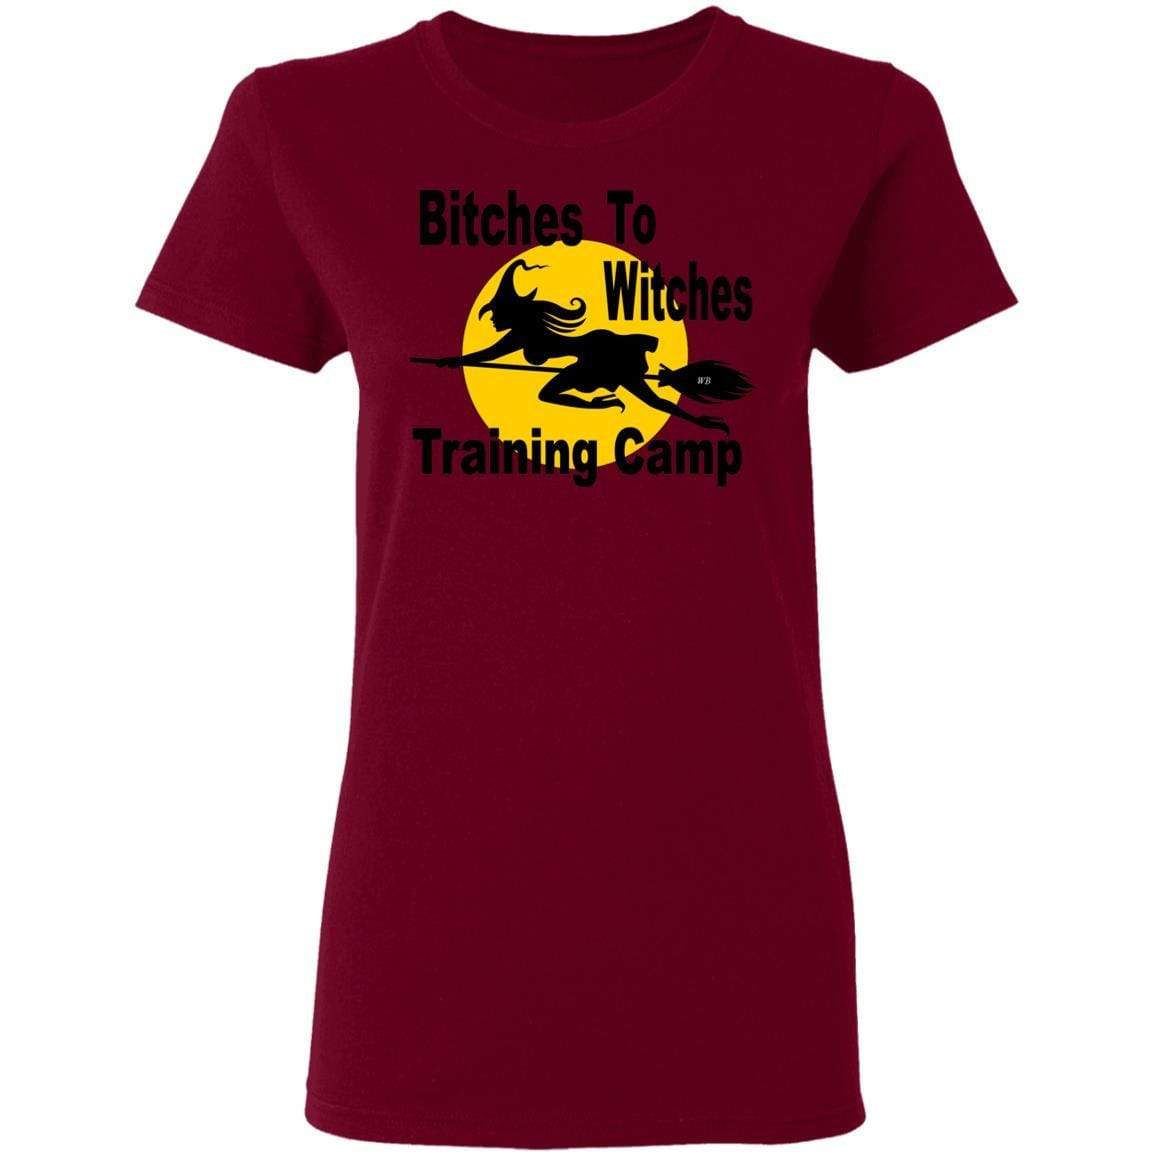 T-Shirts Garnet / S WineyBitches.Co "Bitches To Witches Training Camp" Halloween Ladies' 5.3 oz. T-Shirt WineyBitchesCo